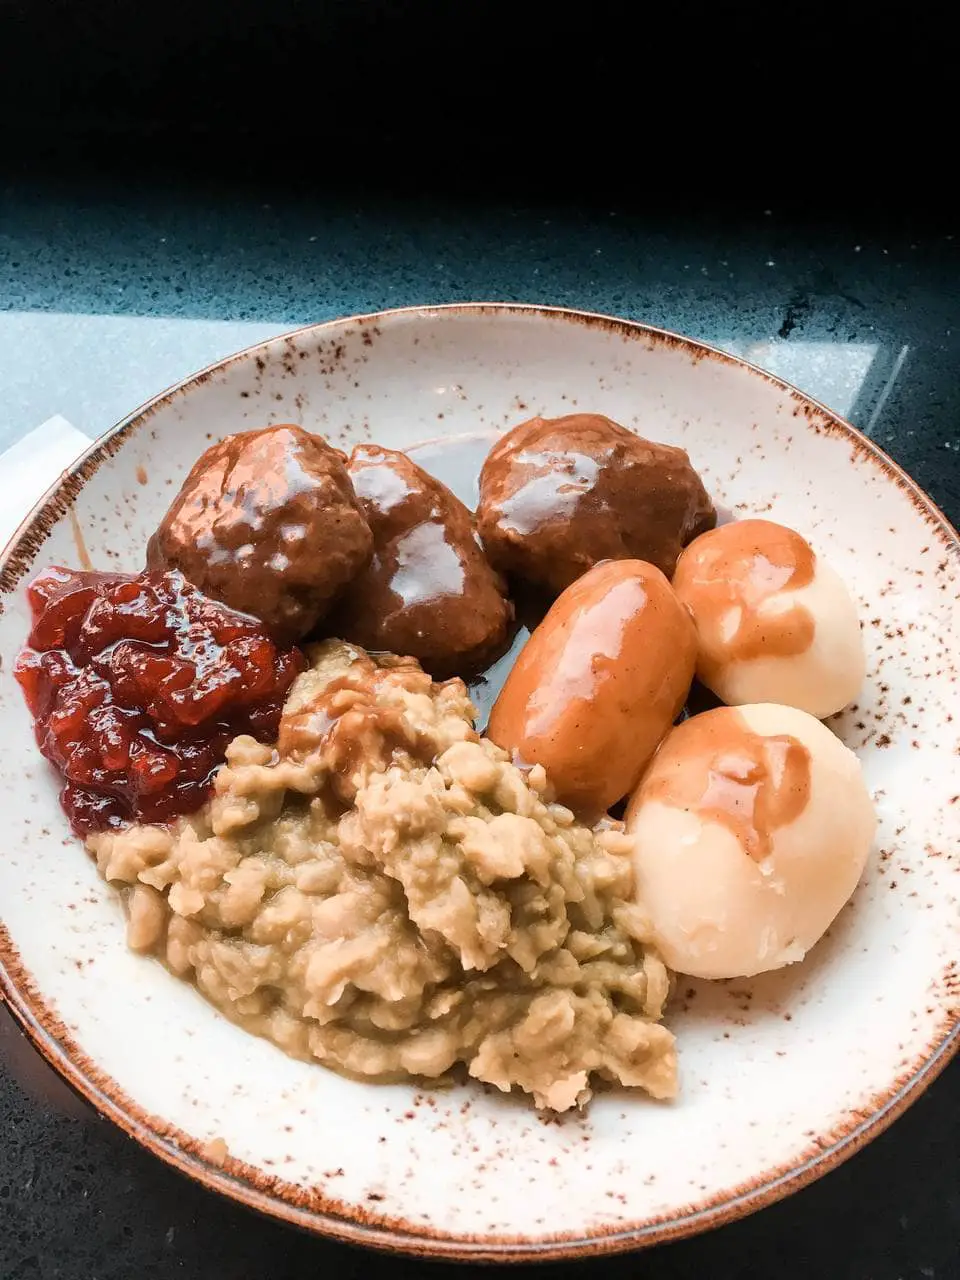 A plate of Norwegian Meatballs served with mashed potatoes, mushy peas and lingonberry jam at Kaffistova in Oslo, Norway. This is the best meal to try during your 2 days in Oslo.